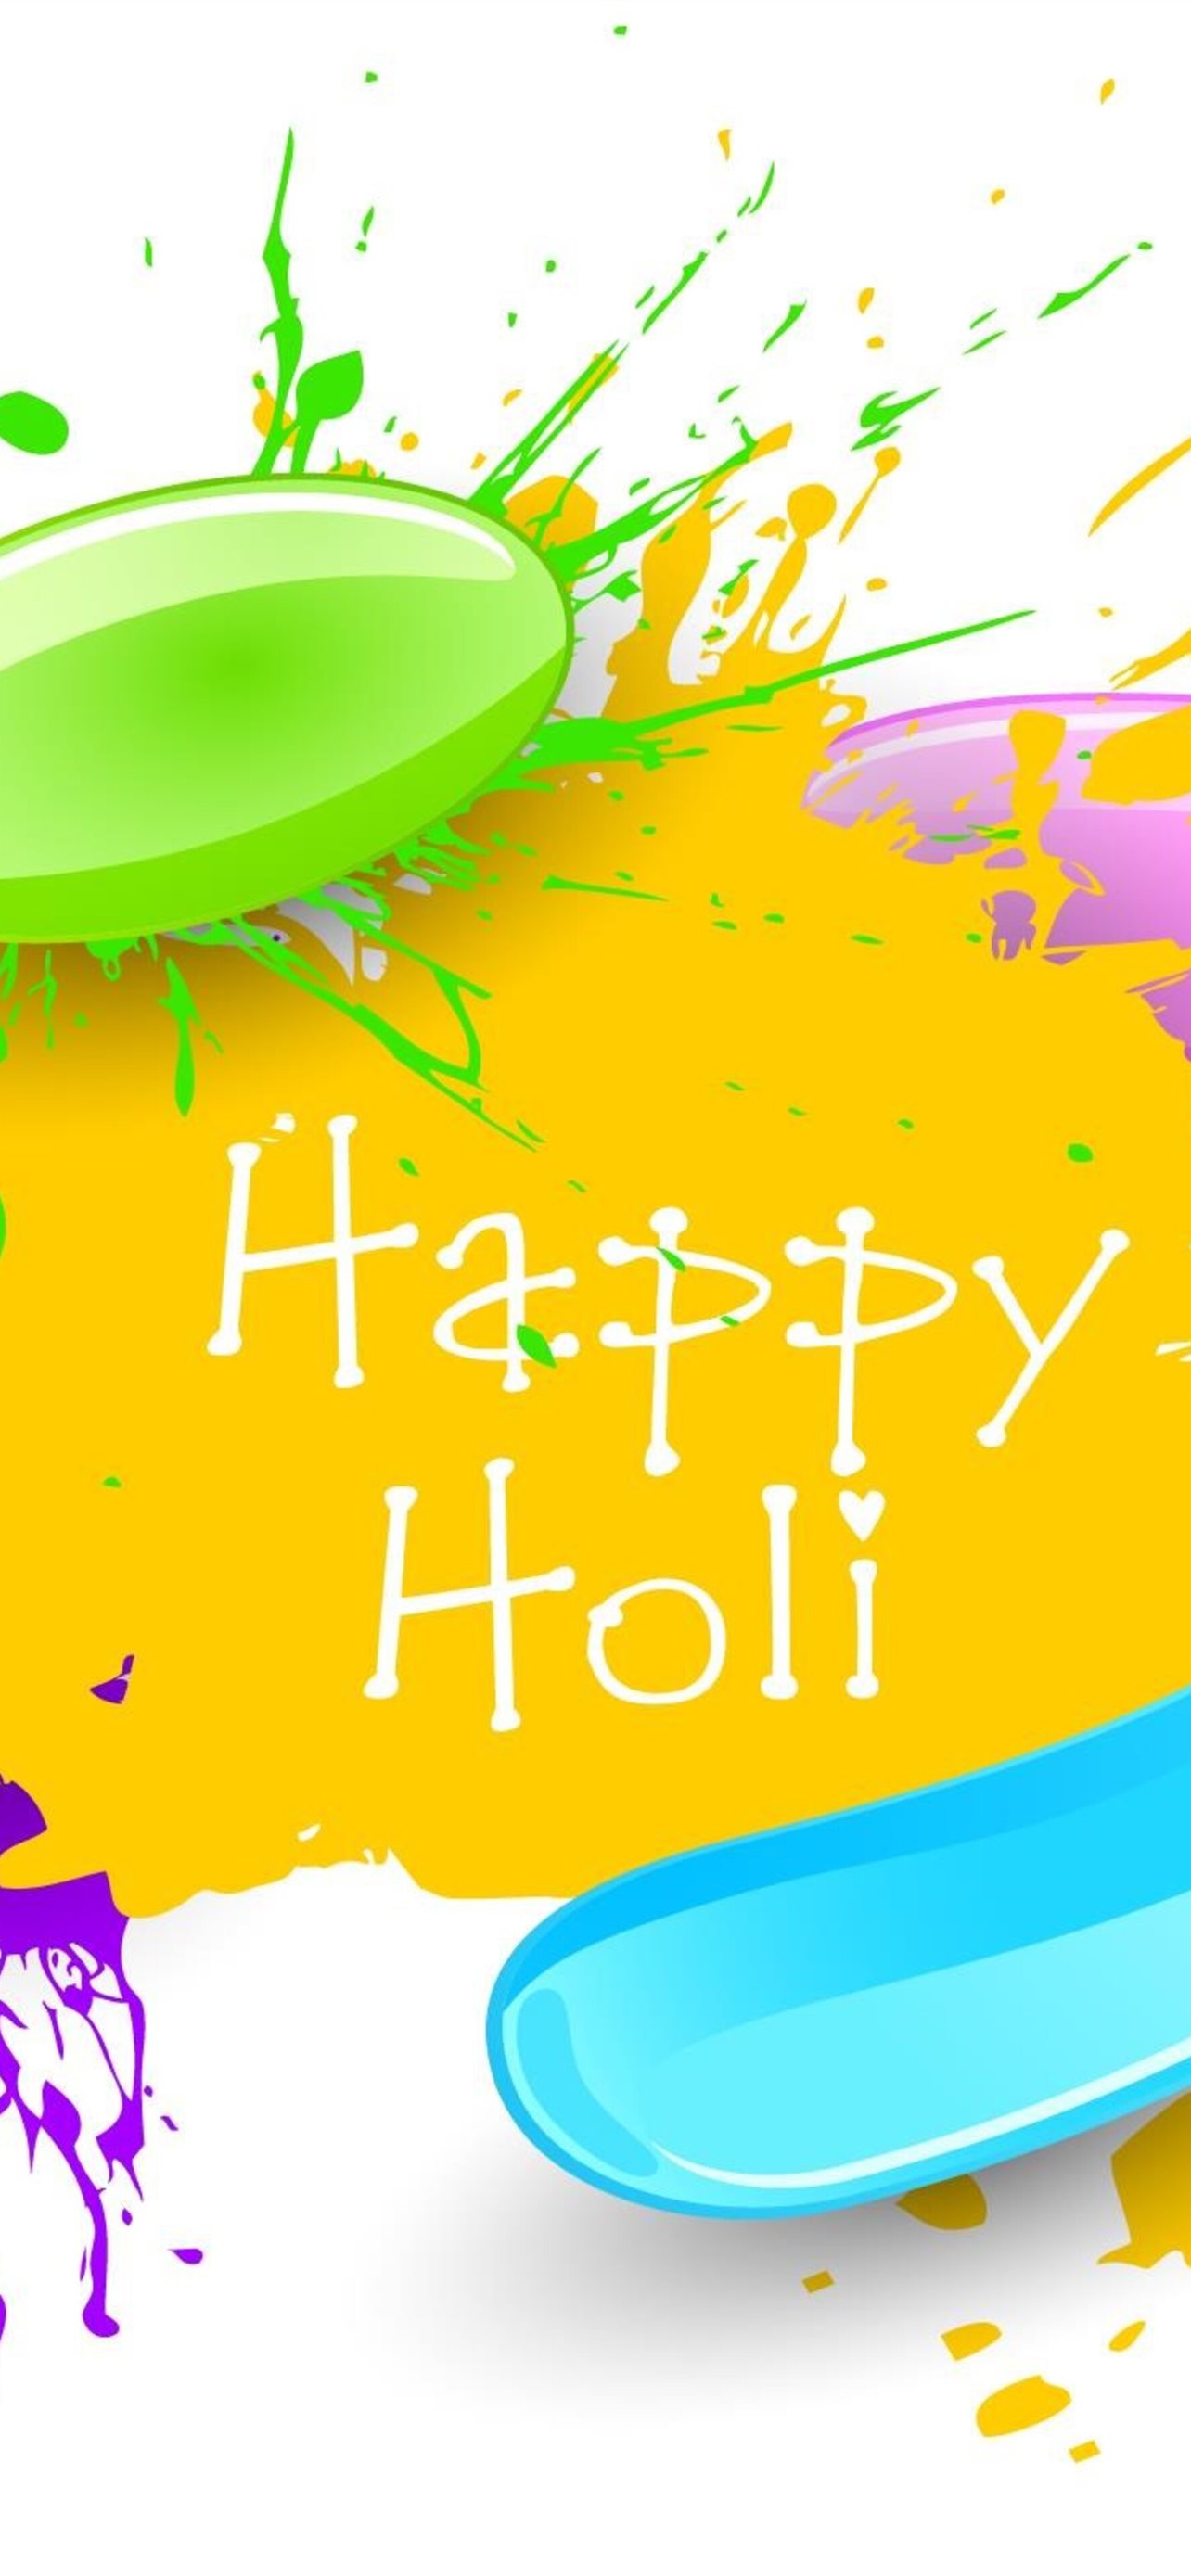 Happy Holi 2020 Stickers Wallpapers  Colourful Images HD Free Download